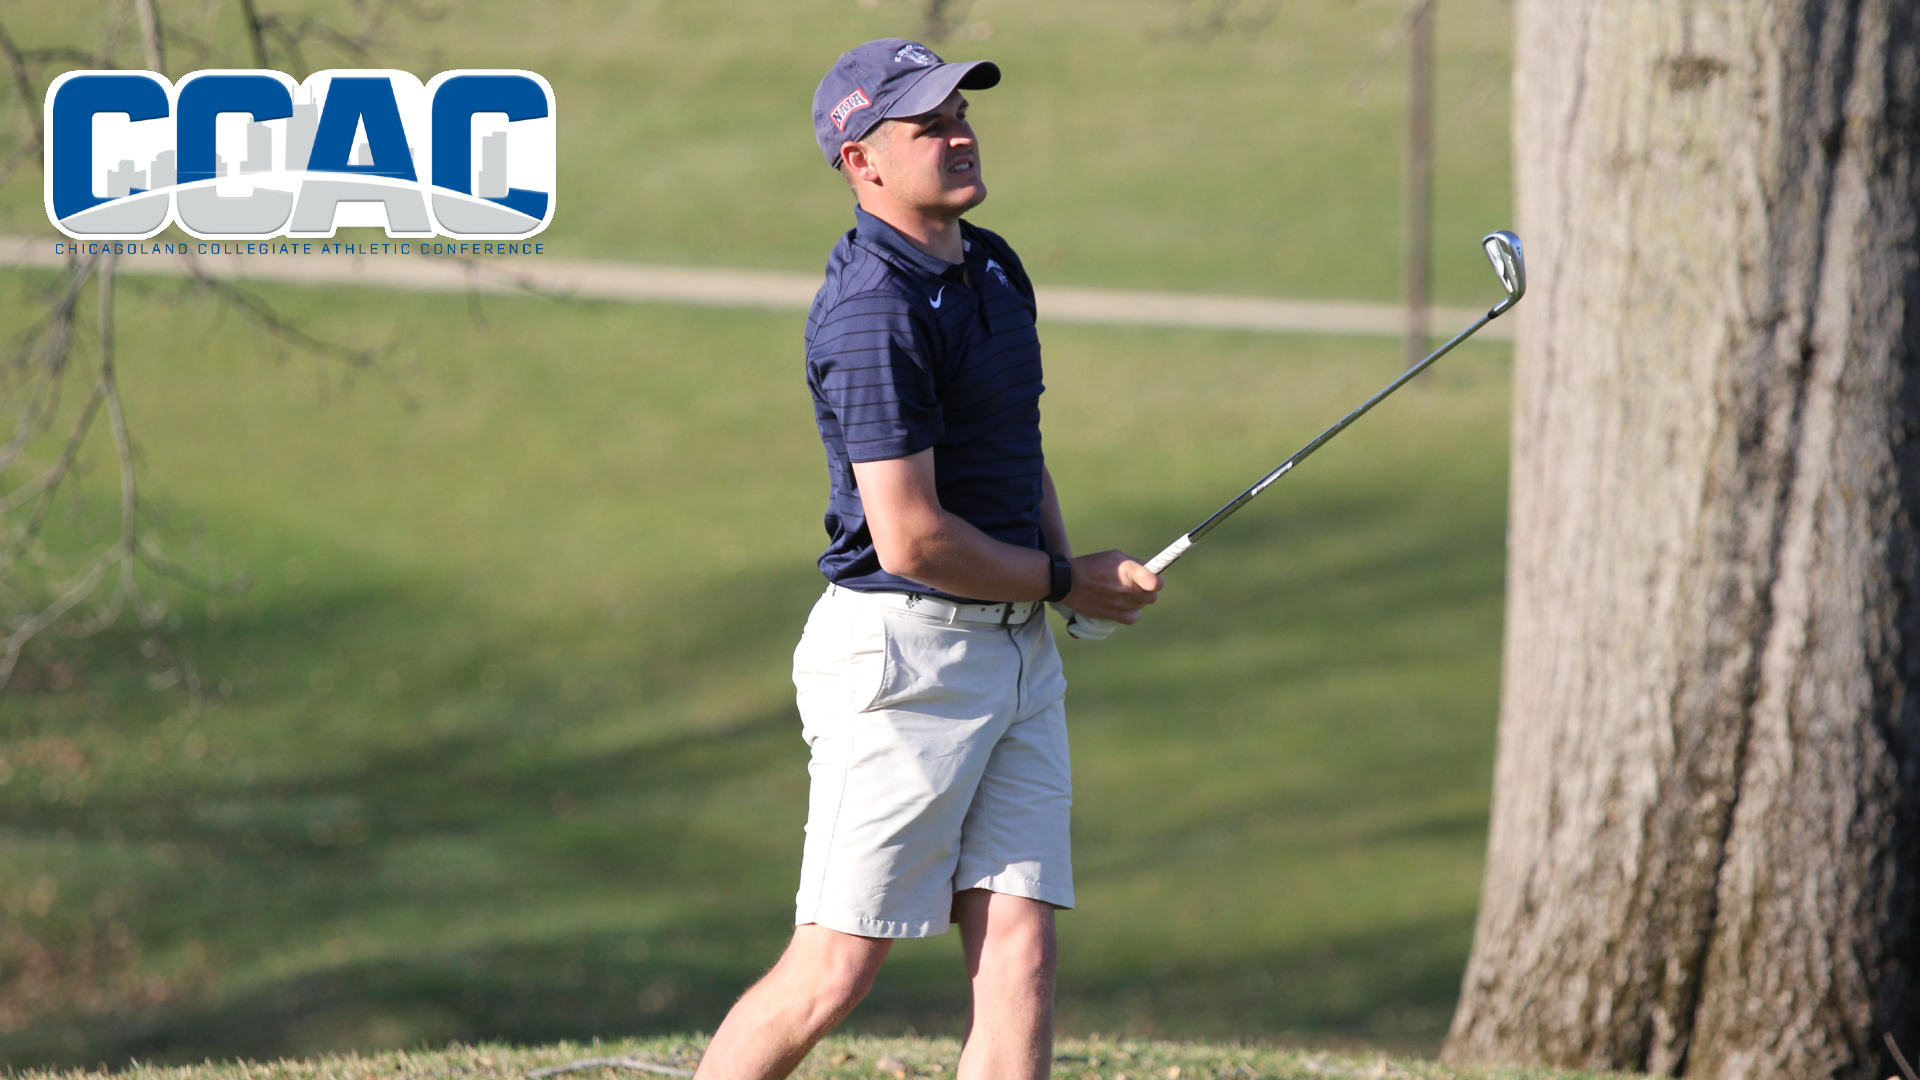 Tigges named CCAC Golfer of the Week